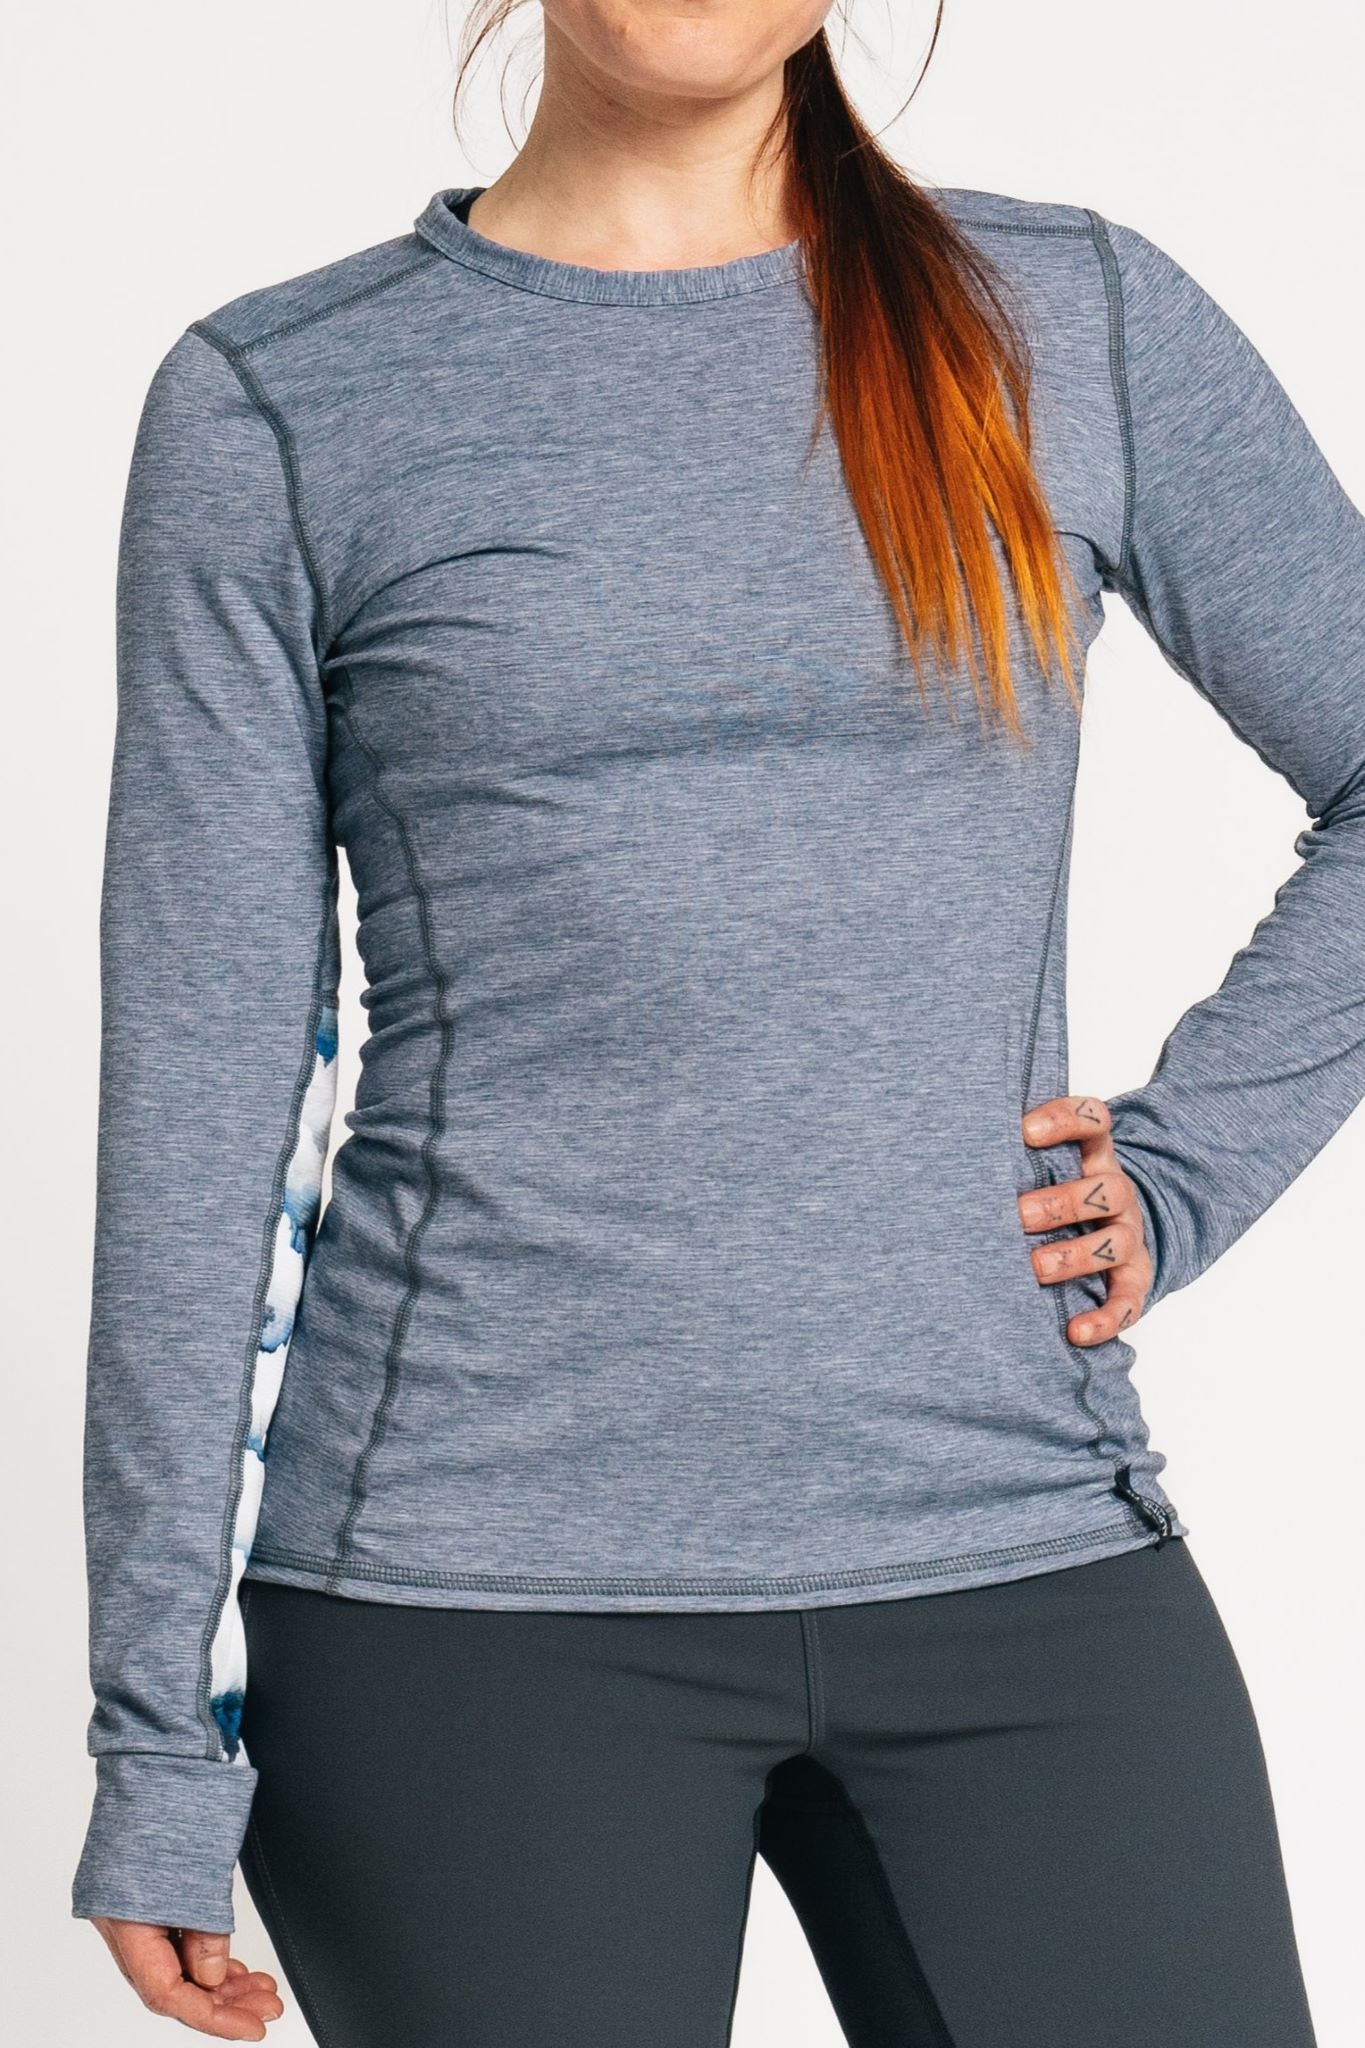 Women's Long Sleeve Activewear Tops & Shirts - Fitted Fit - Under Armour NZ